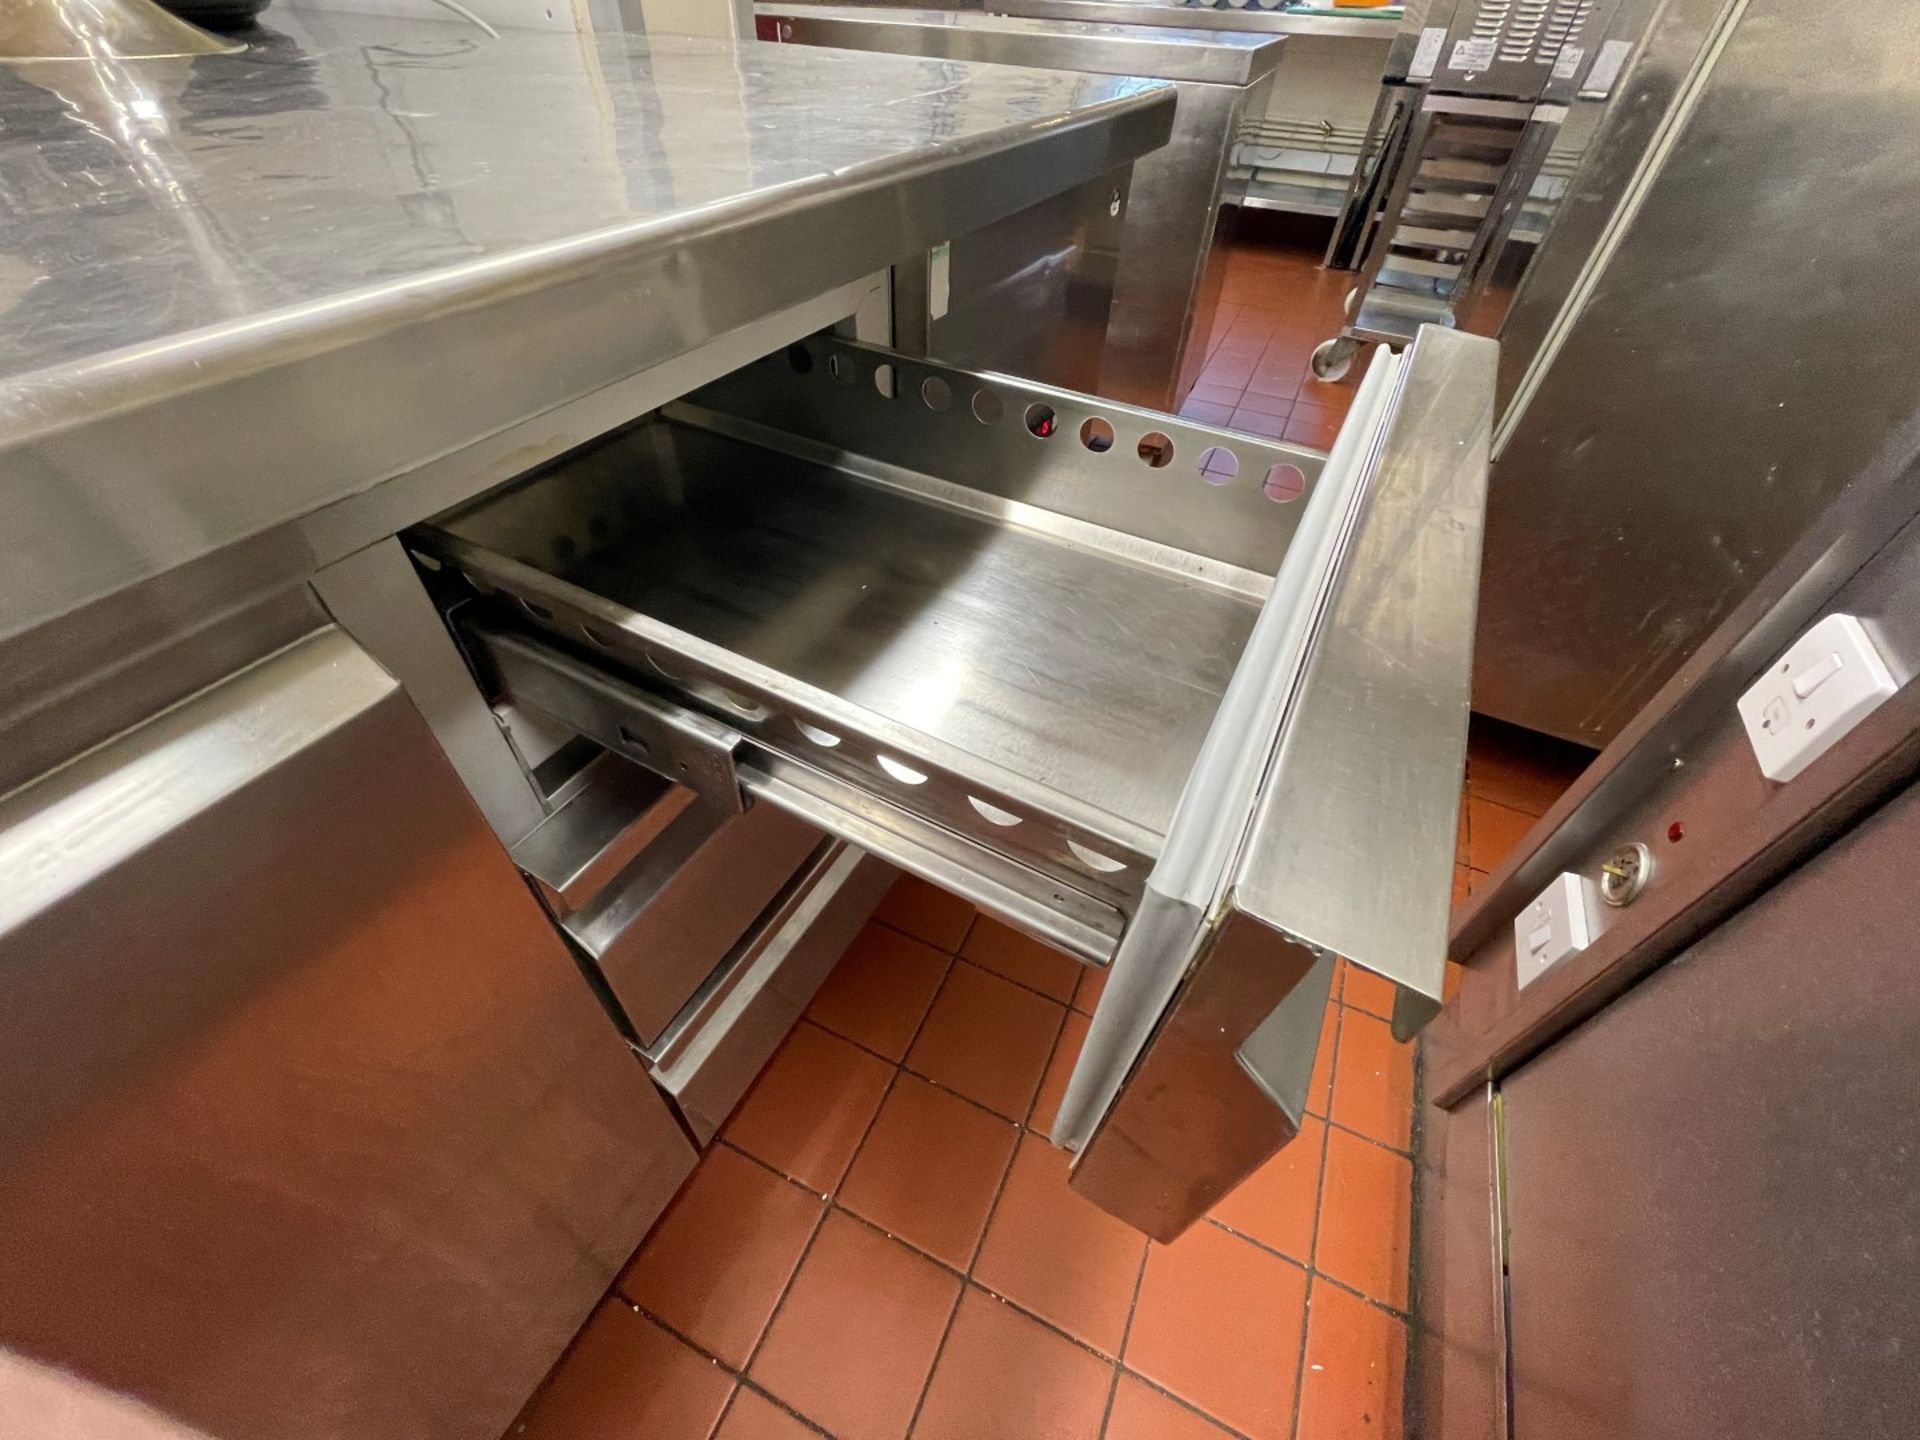 1 x Commercial Refrigerated Prep Counter With Single Door and Three Drawers - Stainless Steel - Image 3 of 5